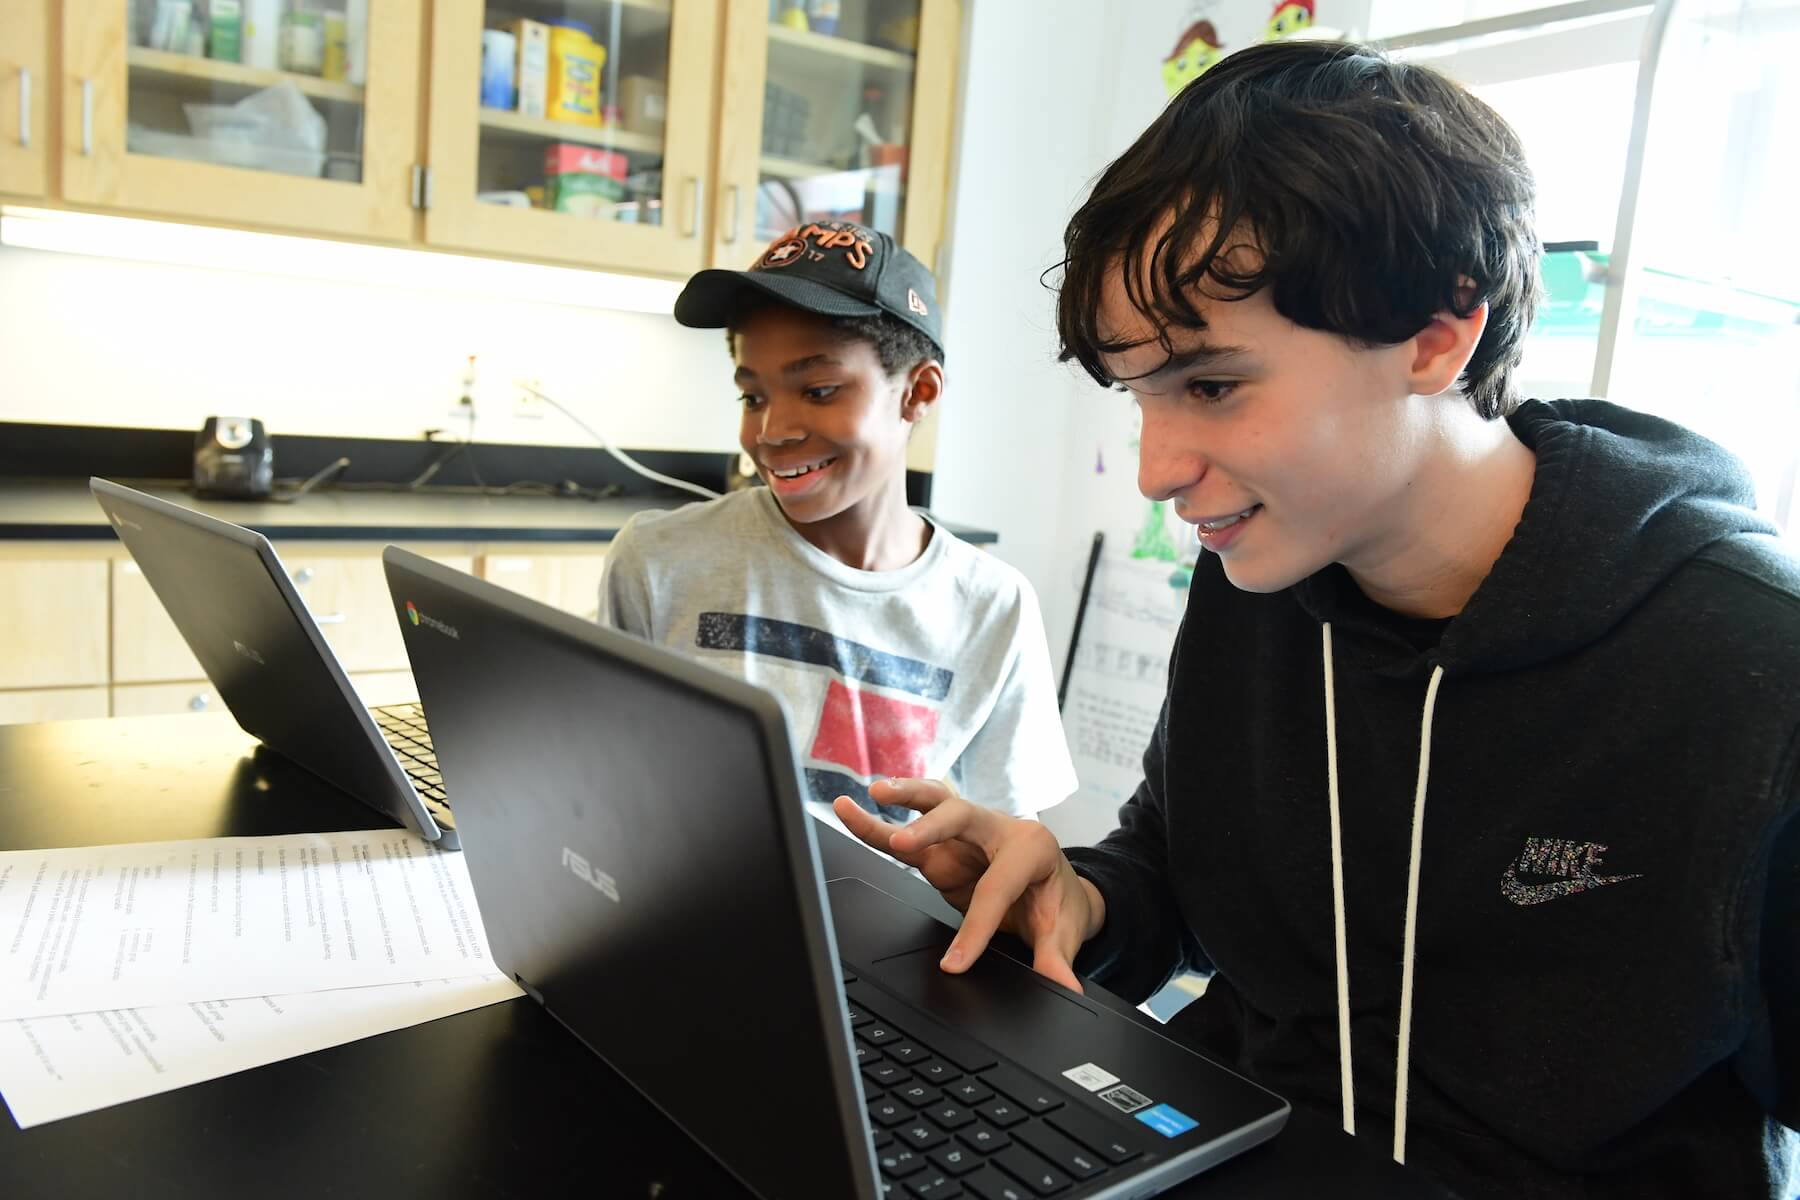 Ethical Culture Fieldston School two Middle School students work together on laptops in the science lab